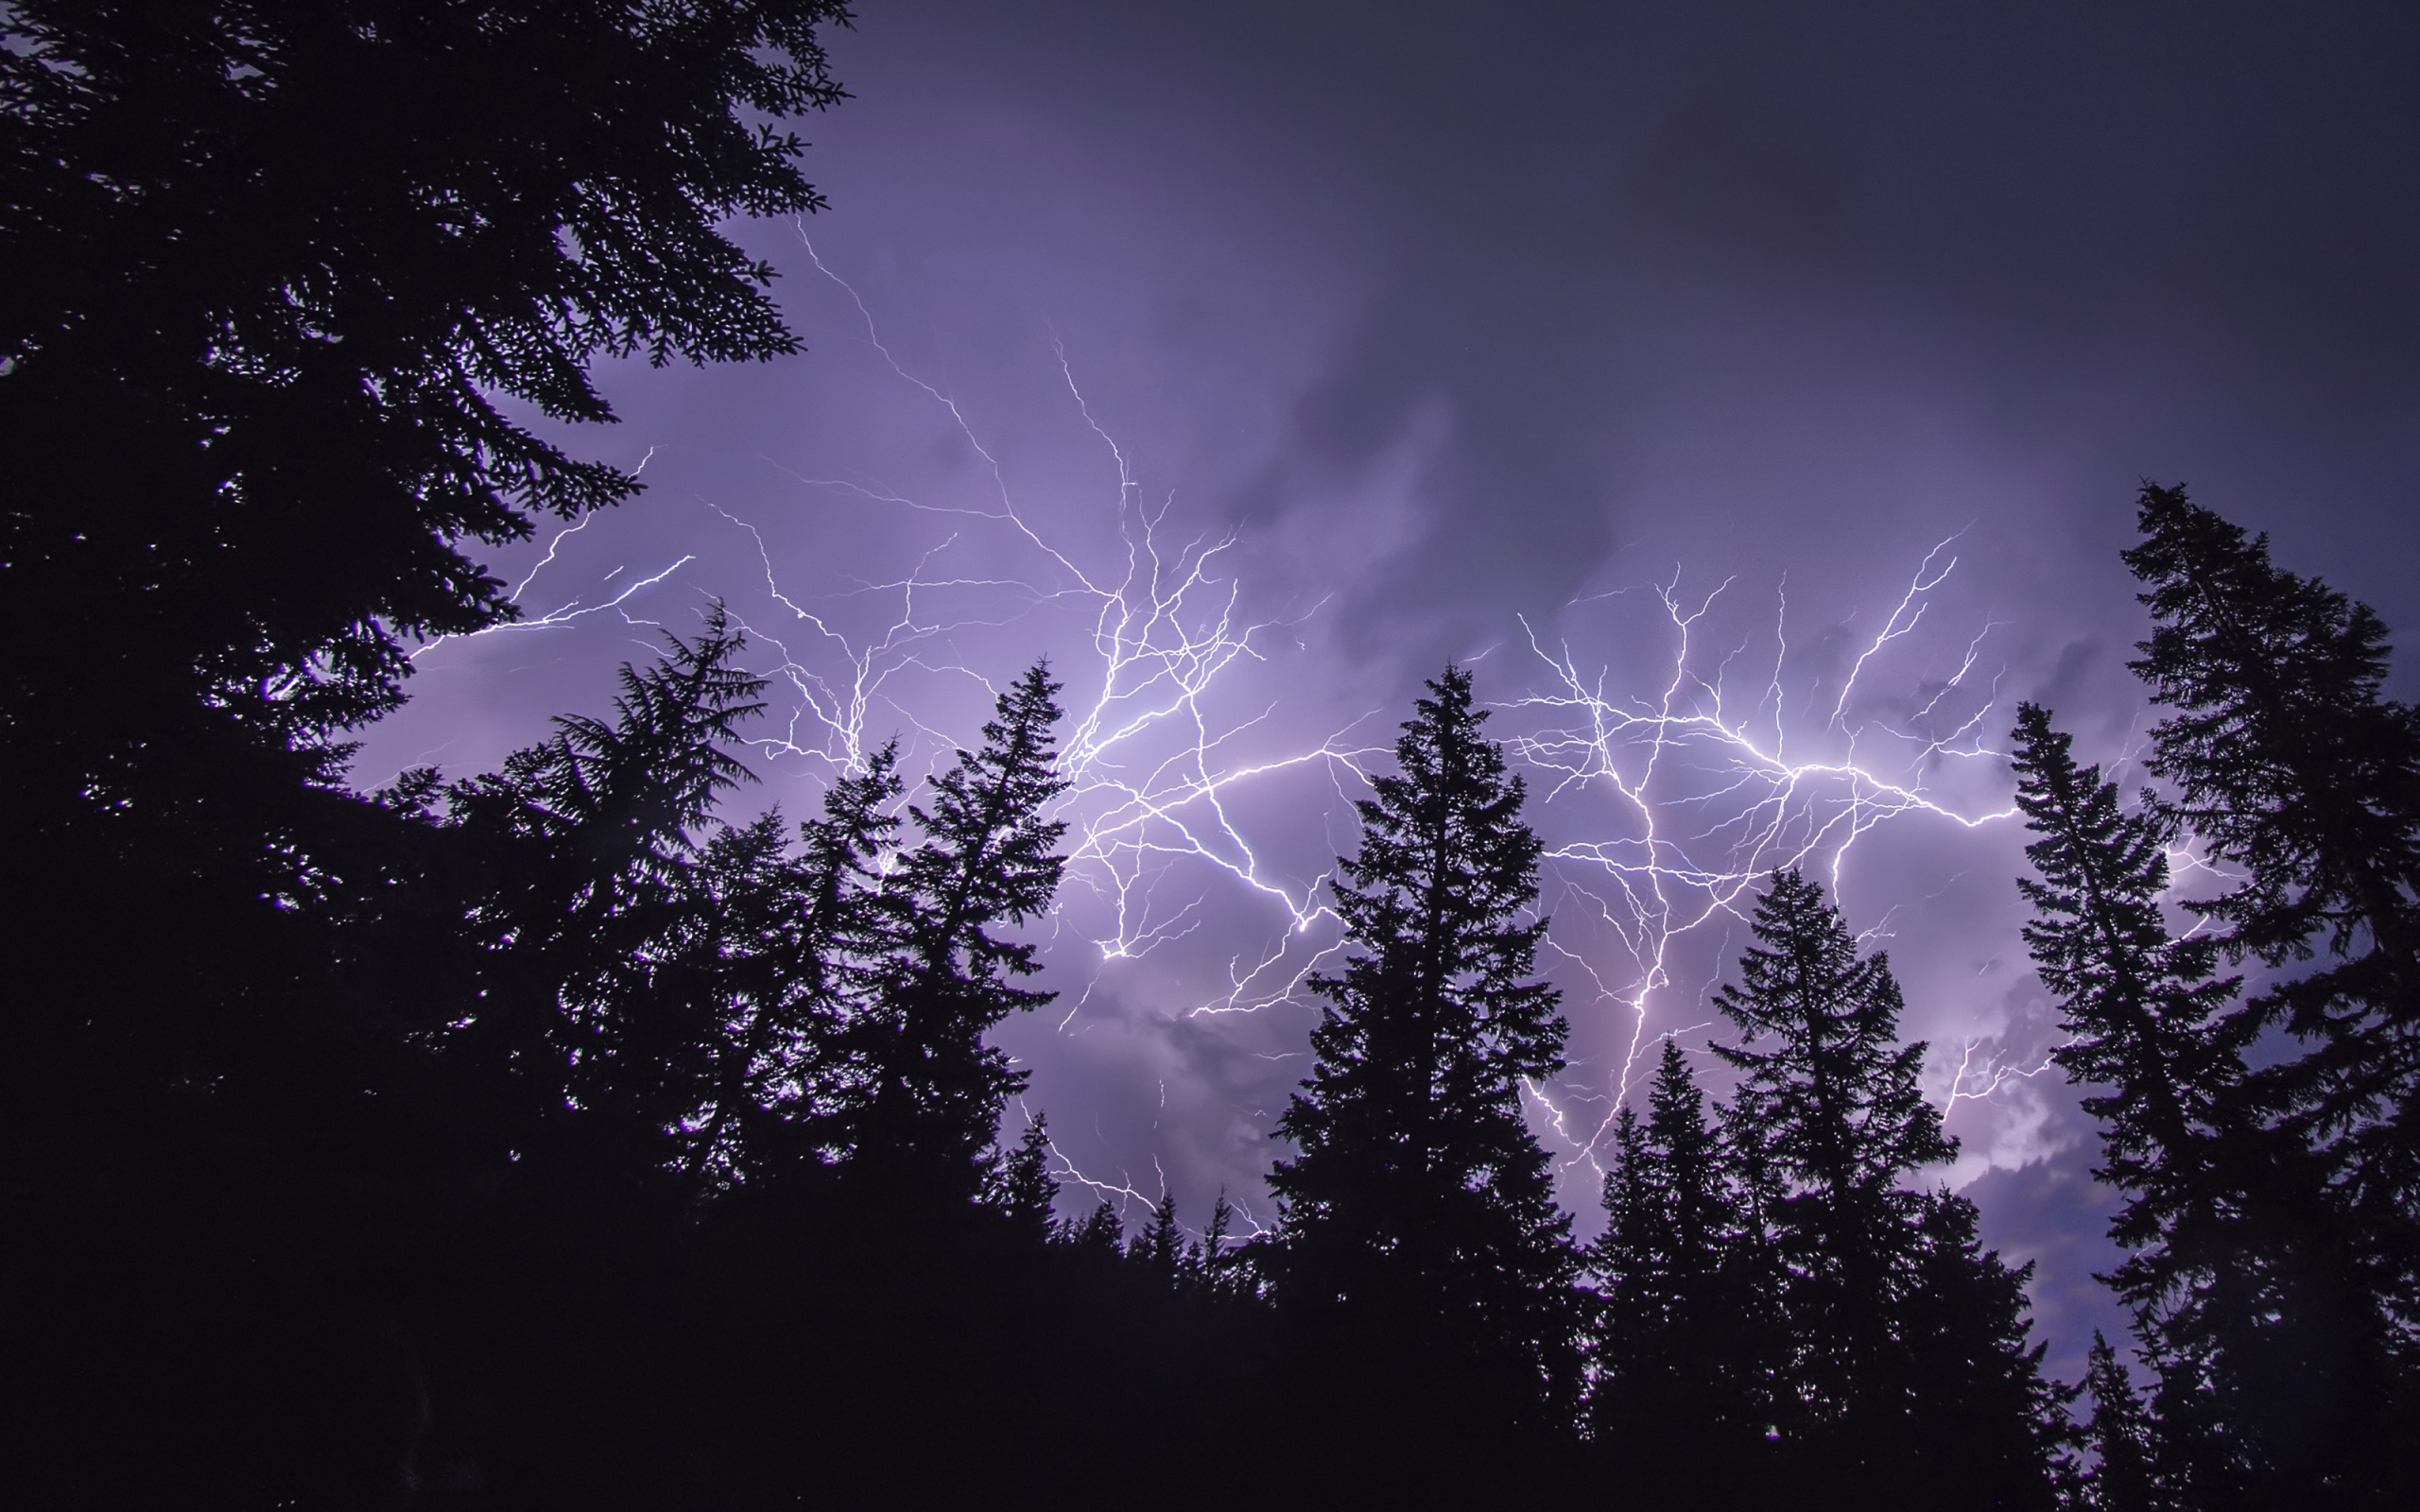 2019Nature_Bright_lightning_over_a_pine_forest_132560_19.jpg